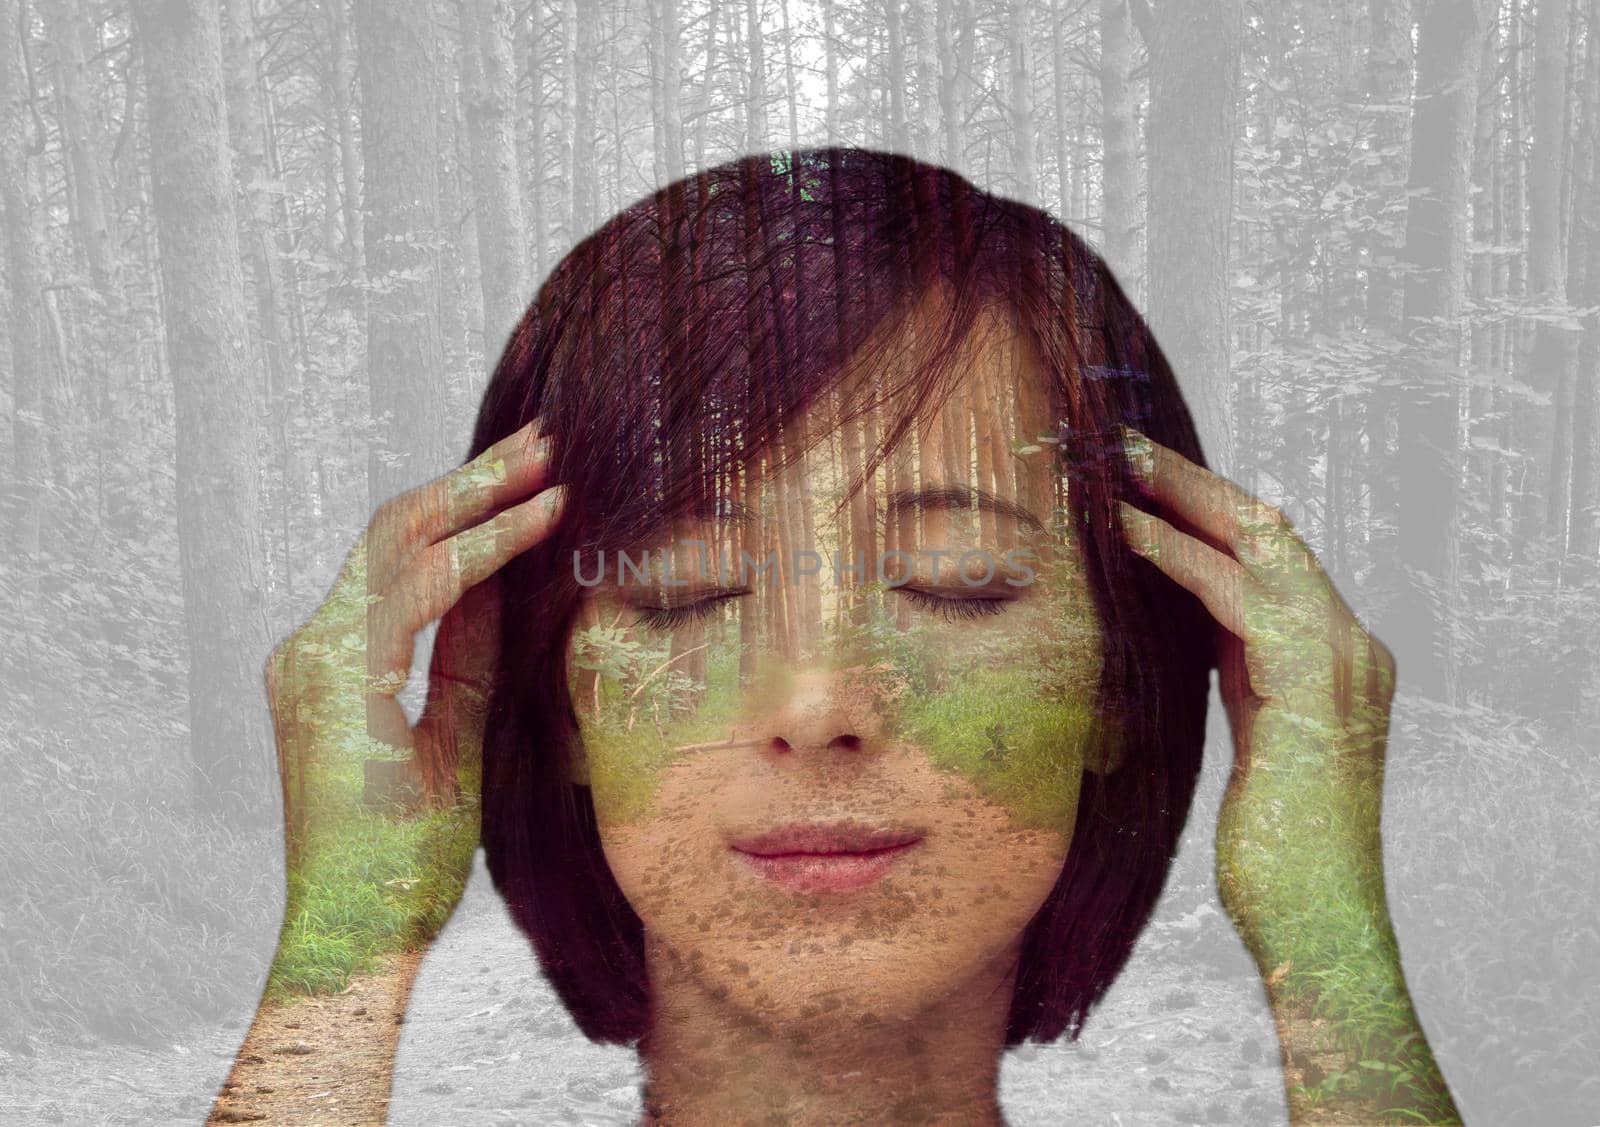 Double exposure portrait of pensive girl combined with image of trees in the forest